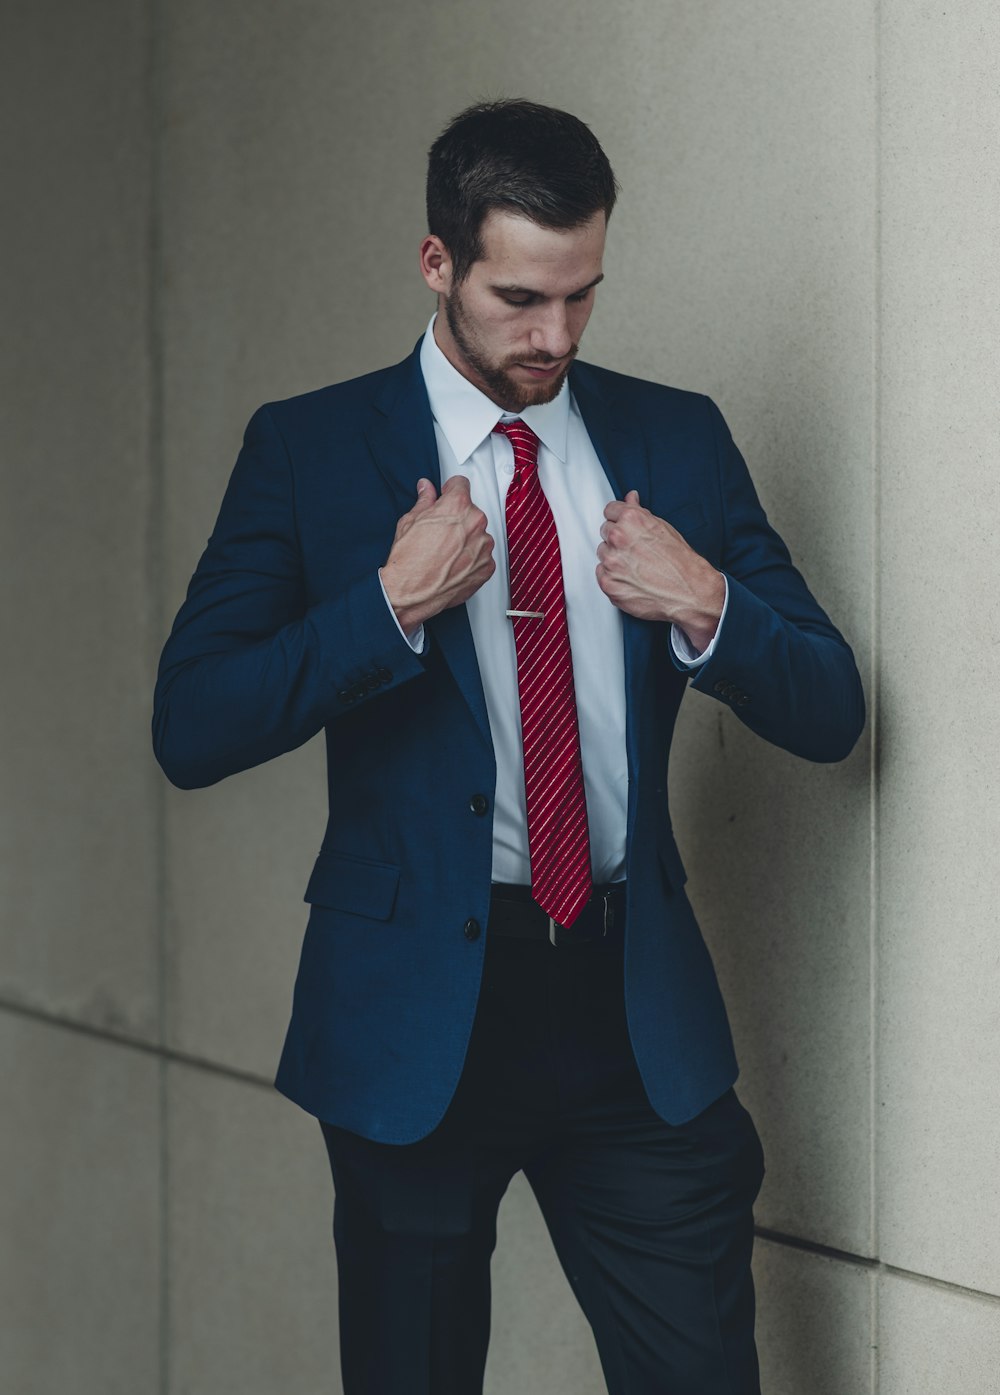 a man in a suit and red tie tying his tie